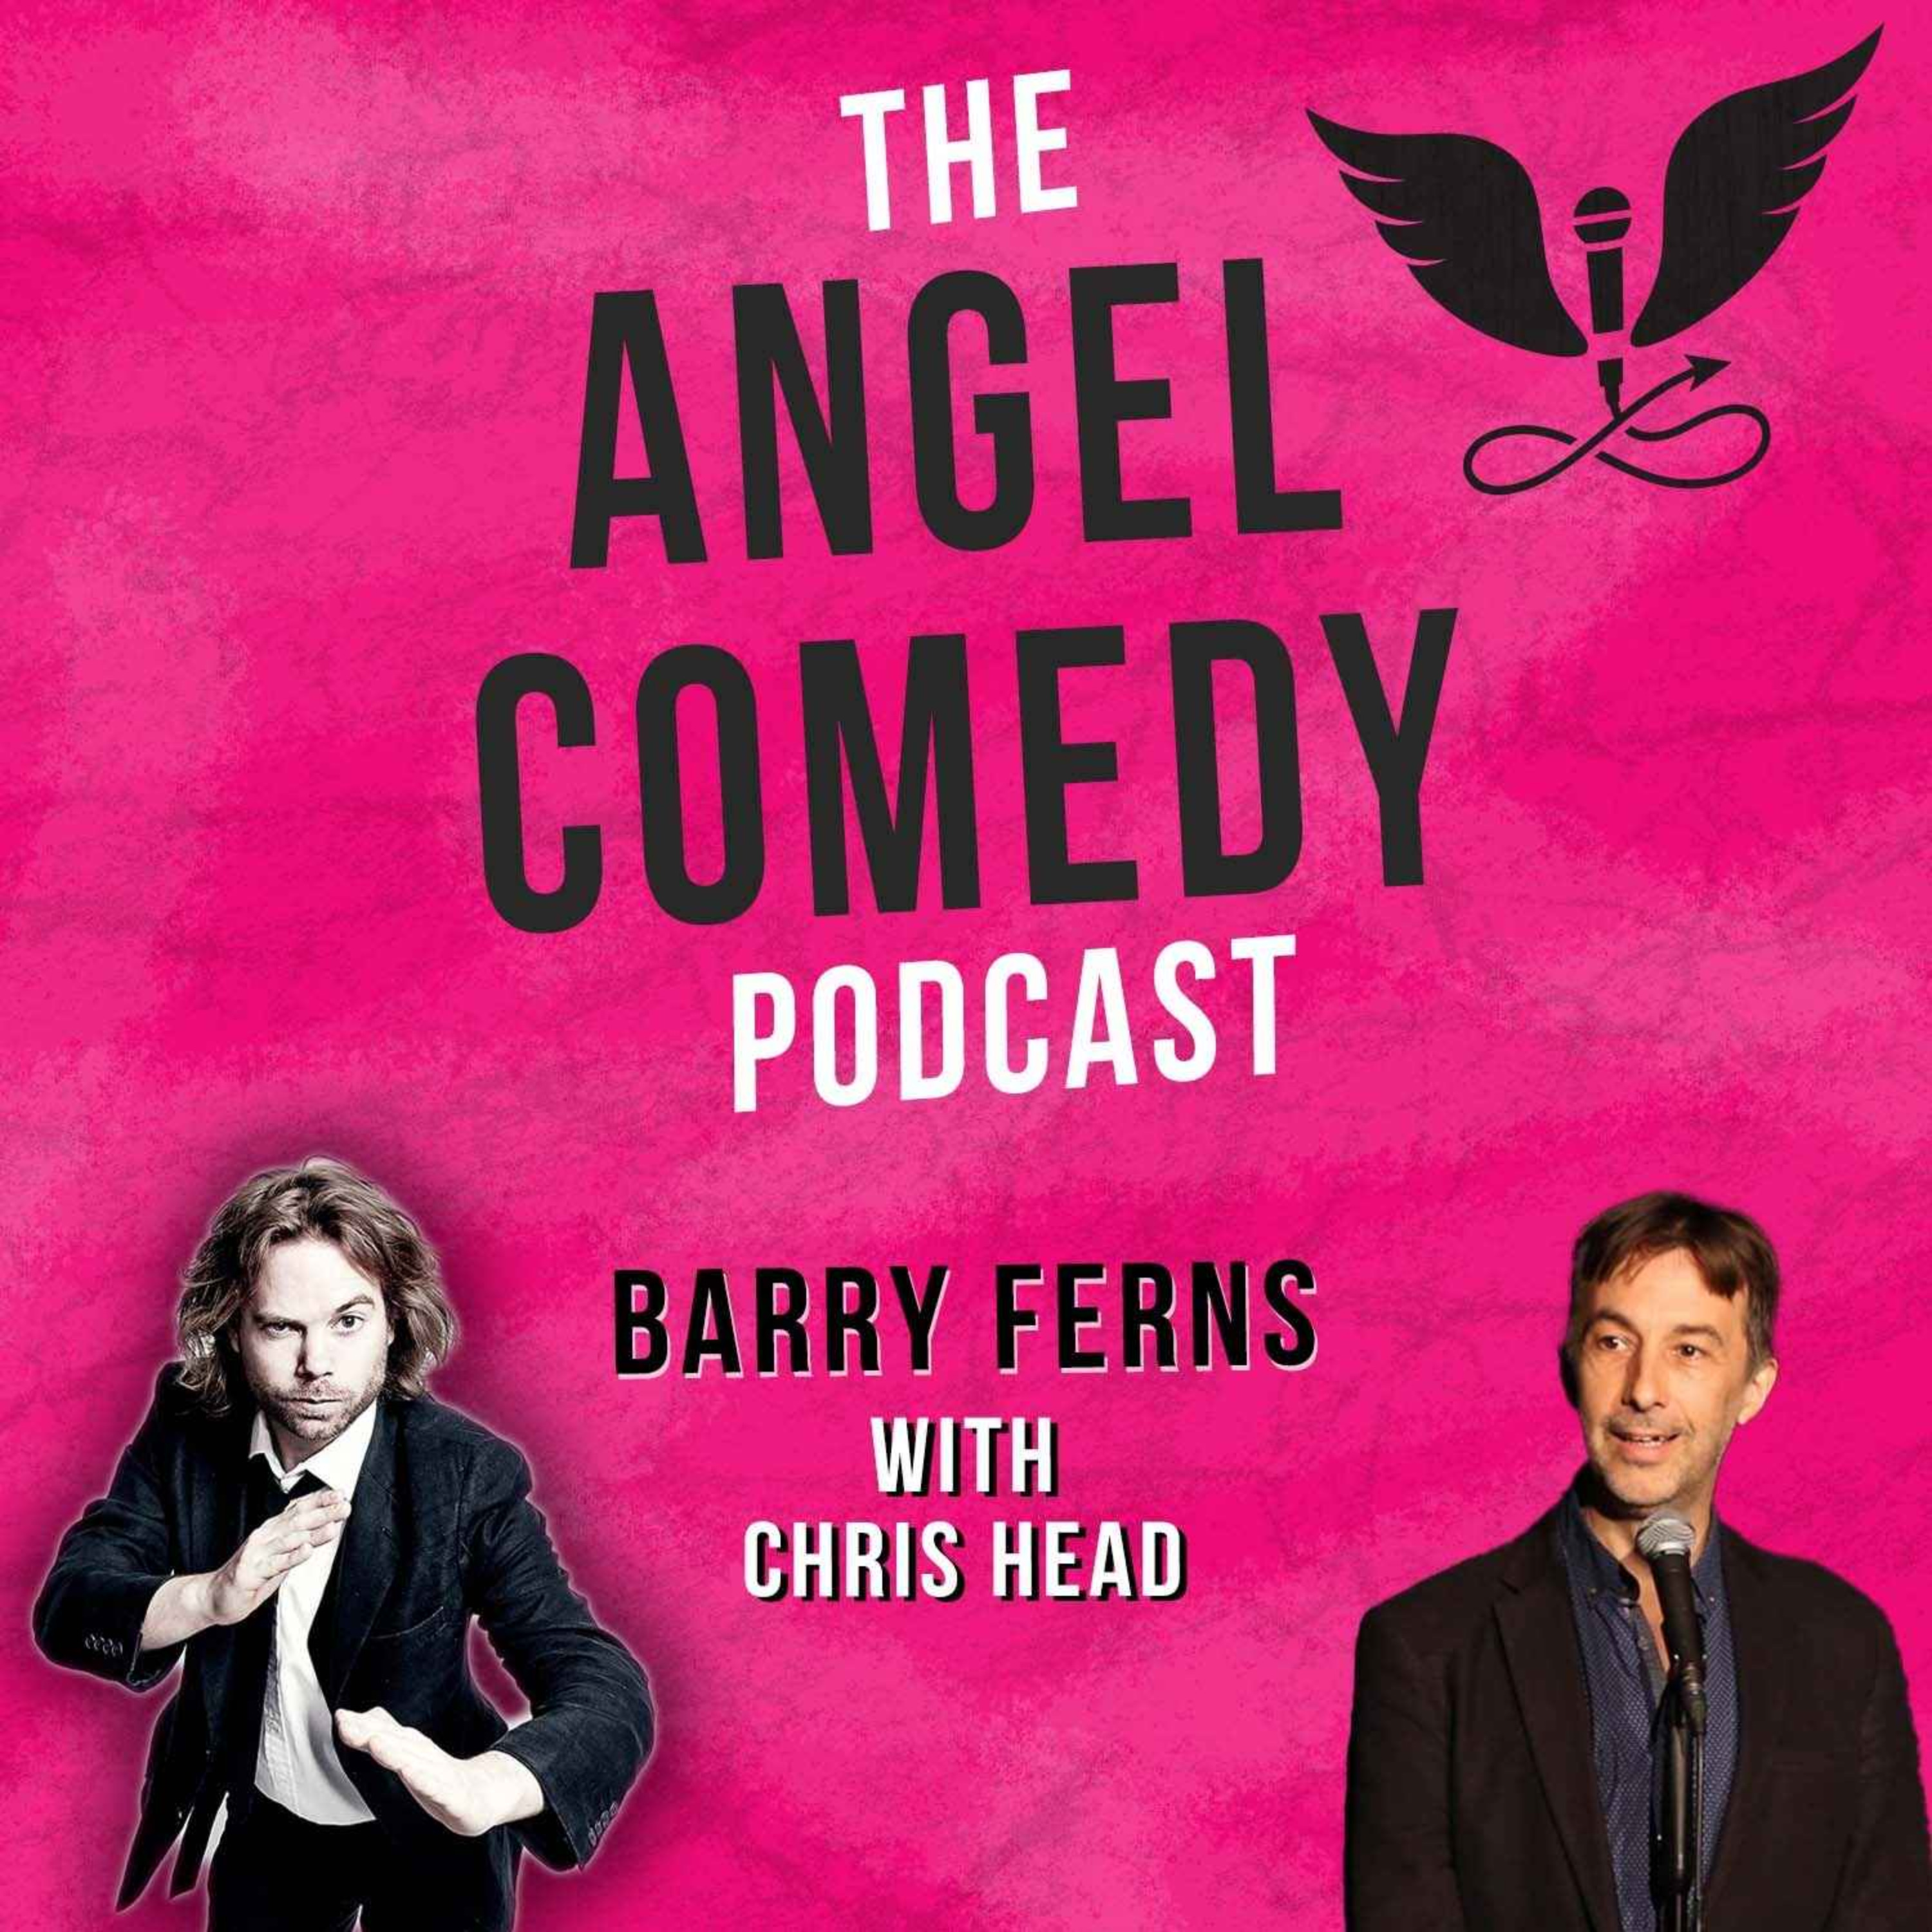 The Angel Comedy Podcast with Chris Head